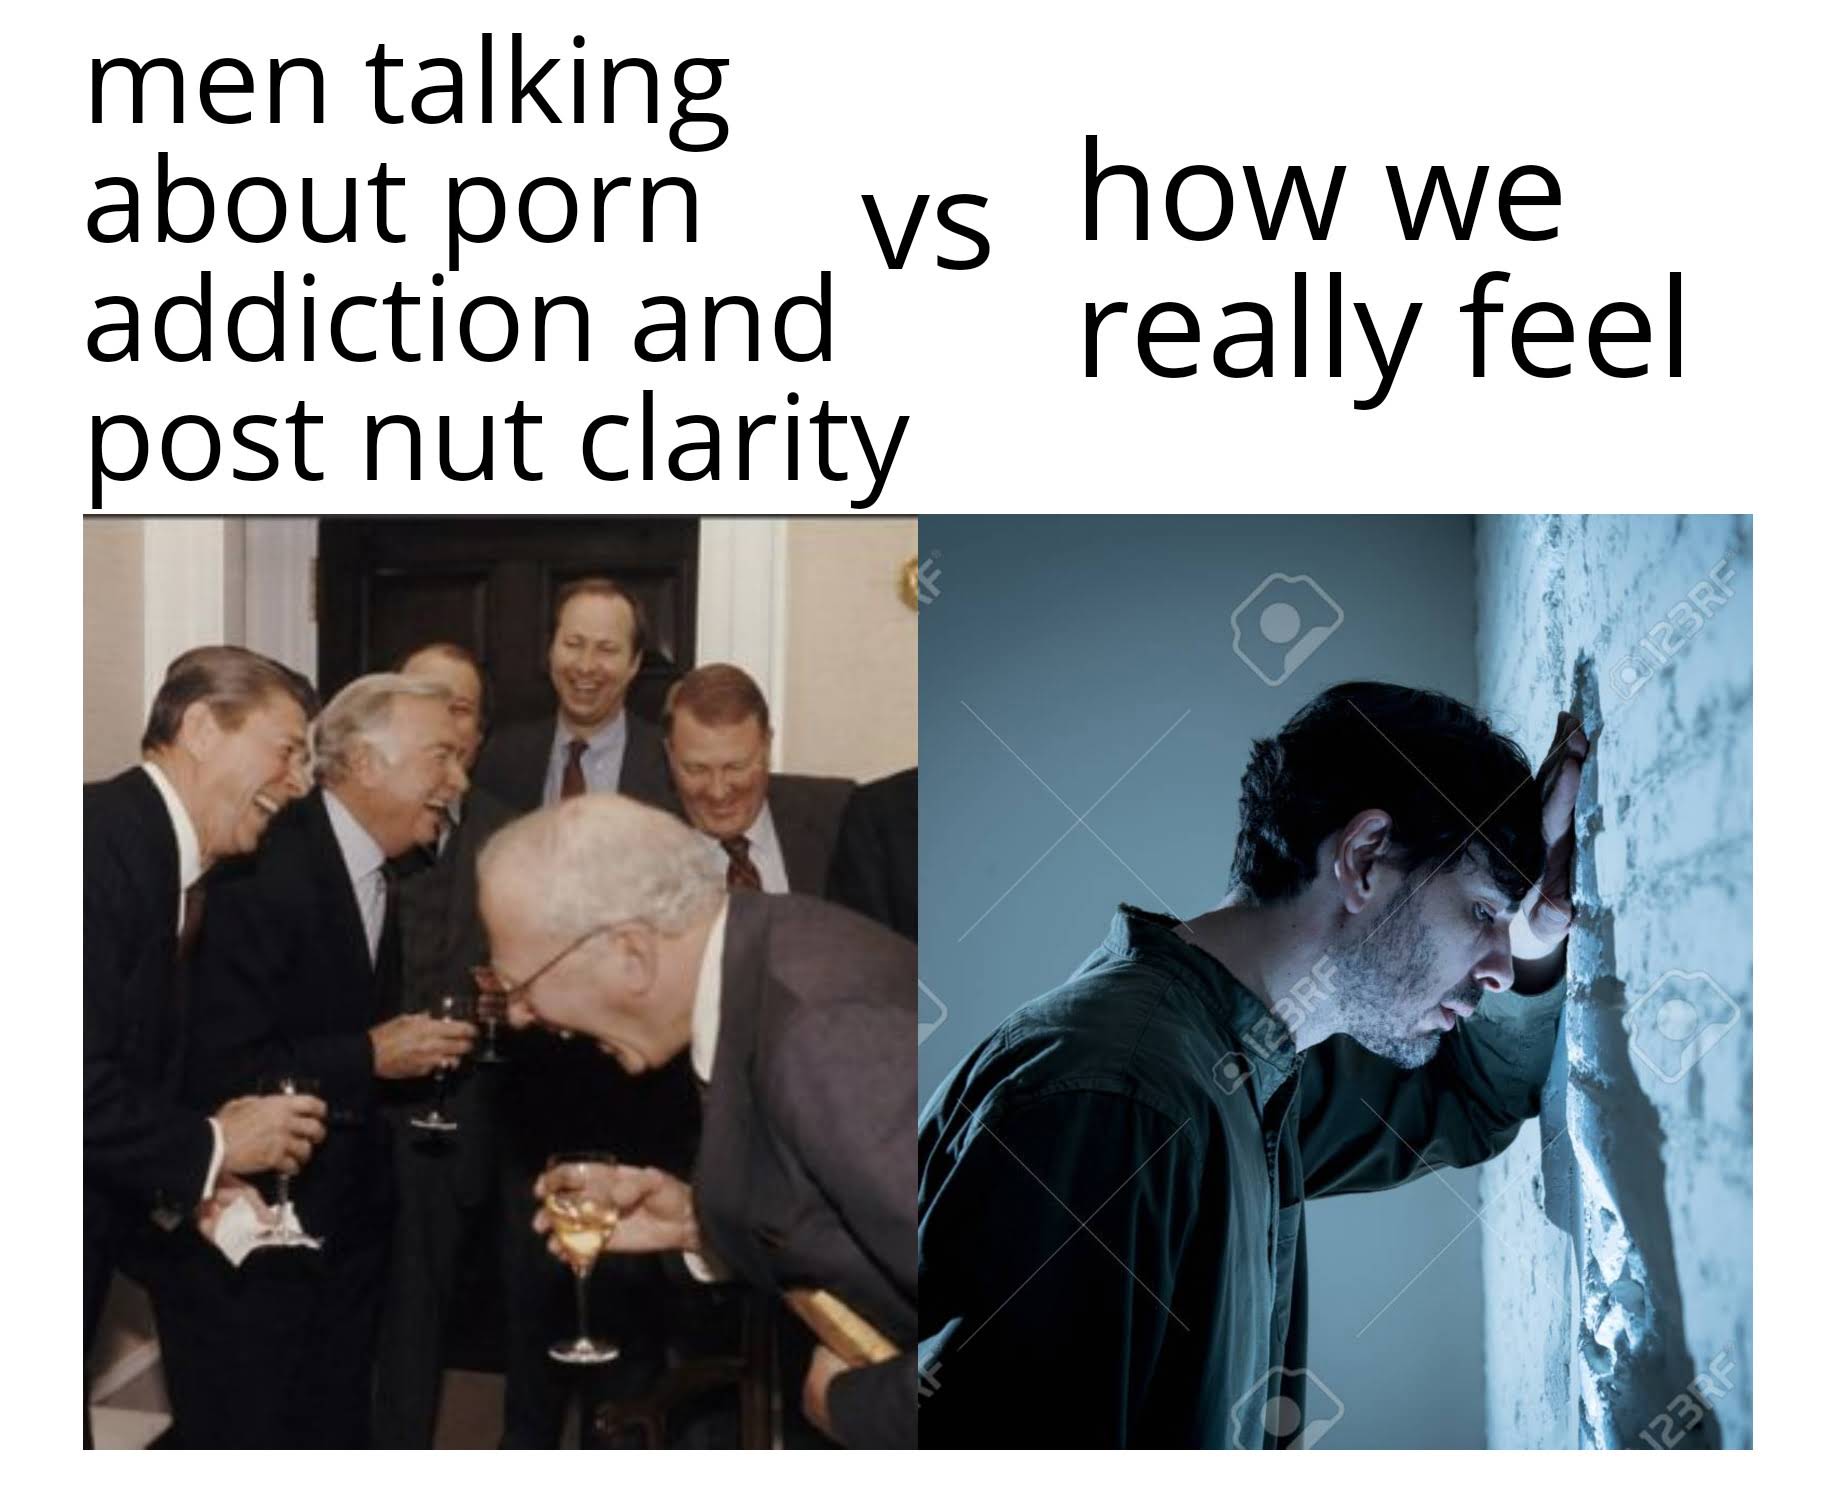 sex-memes - we told them it would - men talking about porn how we Vs addiction and post nut clarity really feel 0123RF 123RF 123RF